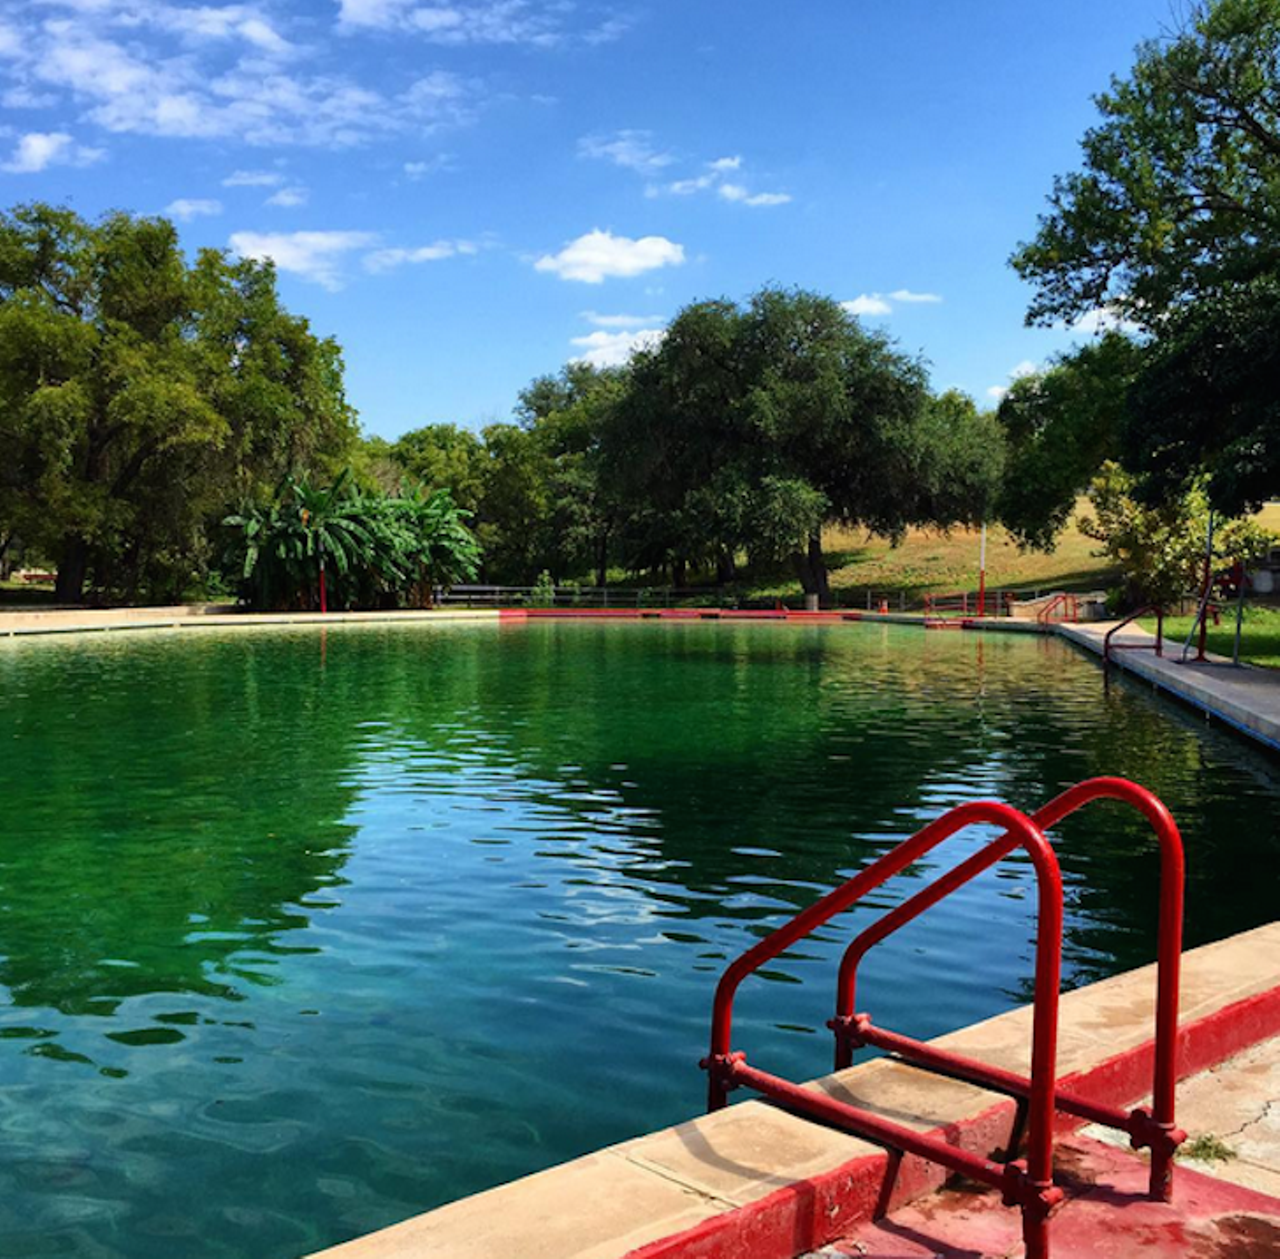 Fort Clark Springs in Bracketville, Texas  
300 US 90, Brackettville, Texas 78832, (830) 563-2493, fortclark.com 
Las Moras Spring feeds this swimming hole, which happens to be the third largest in Texas. A plus? The natural spring keeps the waters at an average 68 degrees year round.
Photo via Instagram (instagramtexas0)